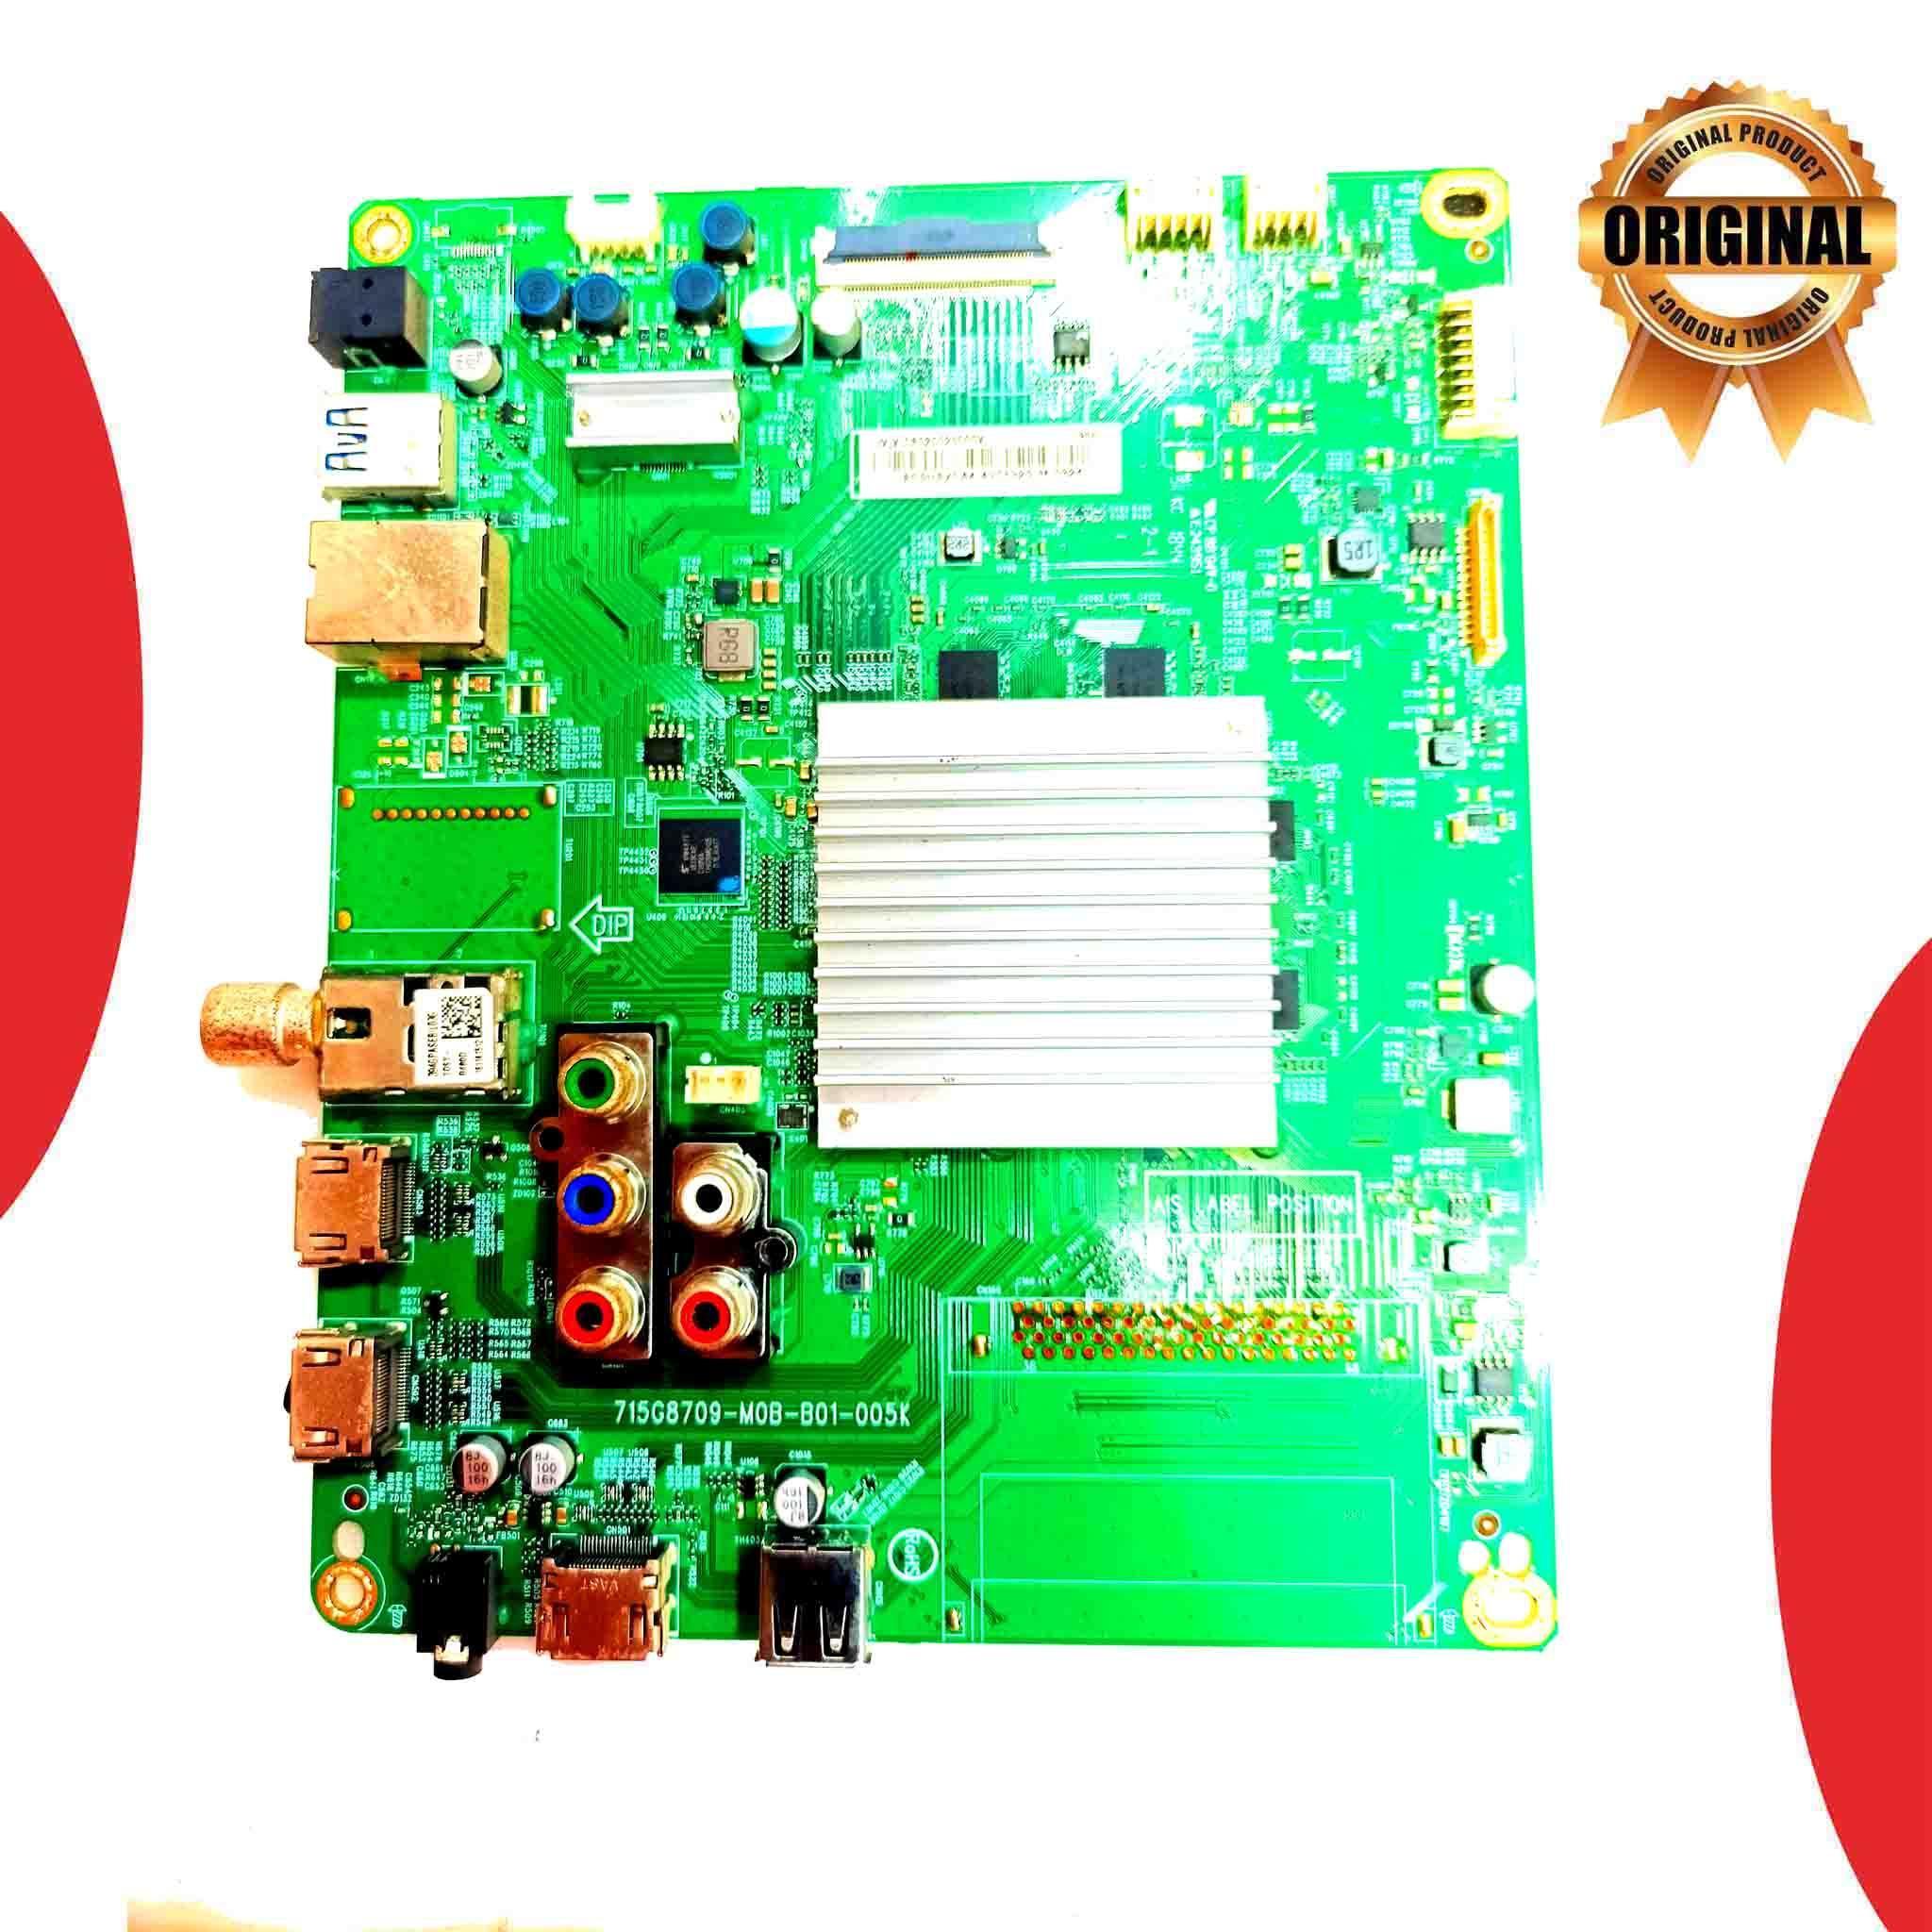 Philips 55 inch LED TV Motherboard for Model 55PUT6103S-94 - Great Bharat Electronics